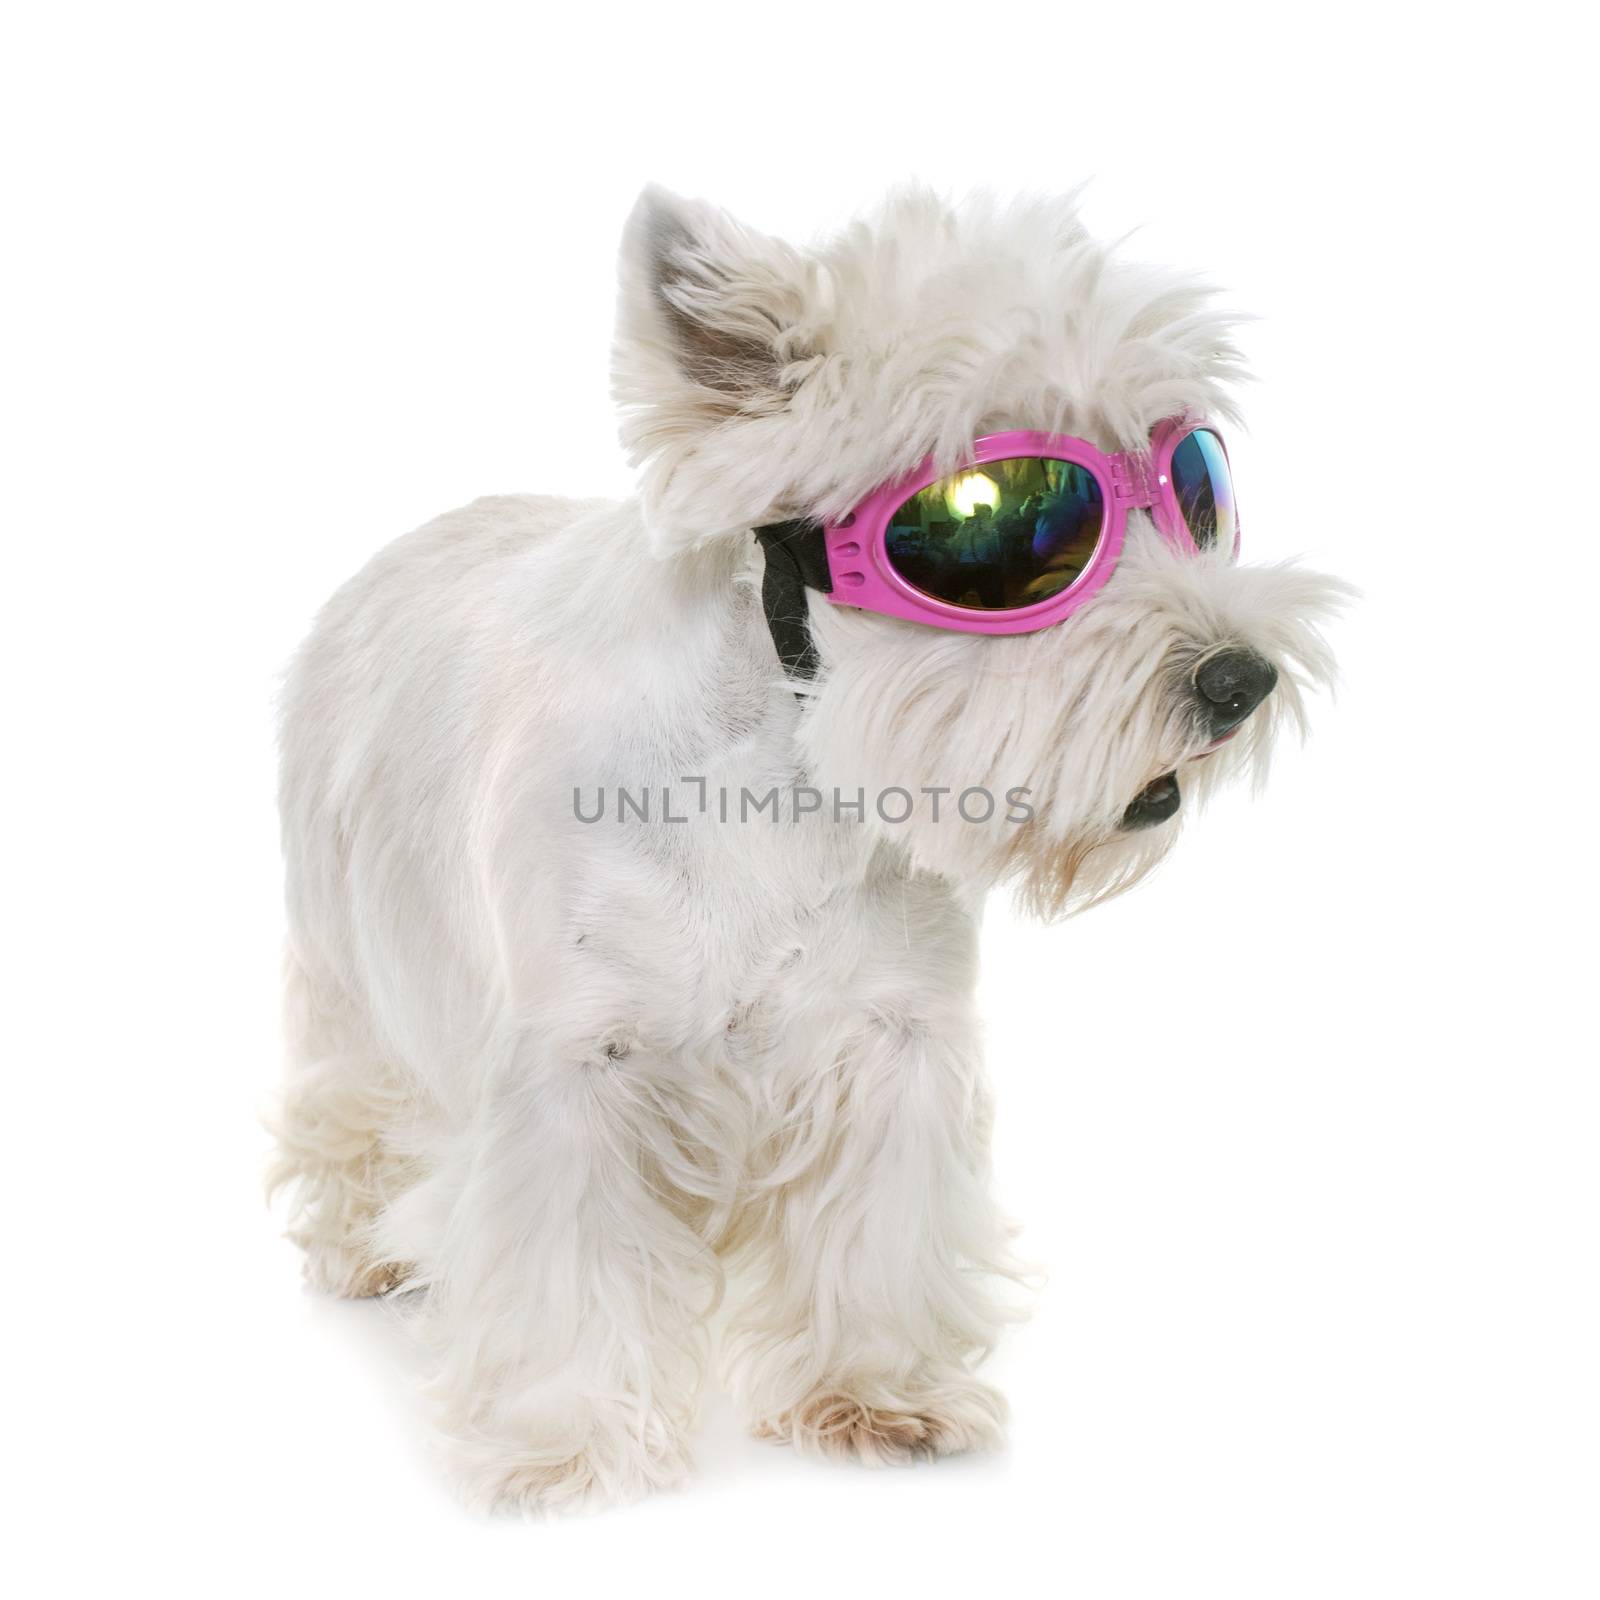 adult west highland white terrier in studio